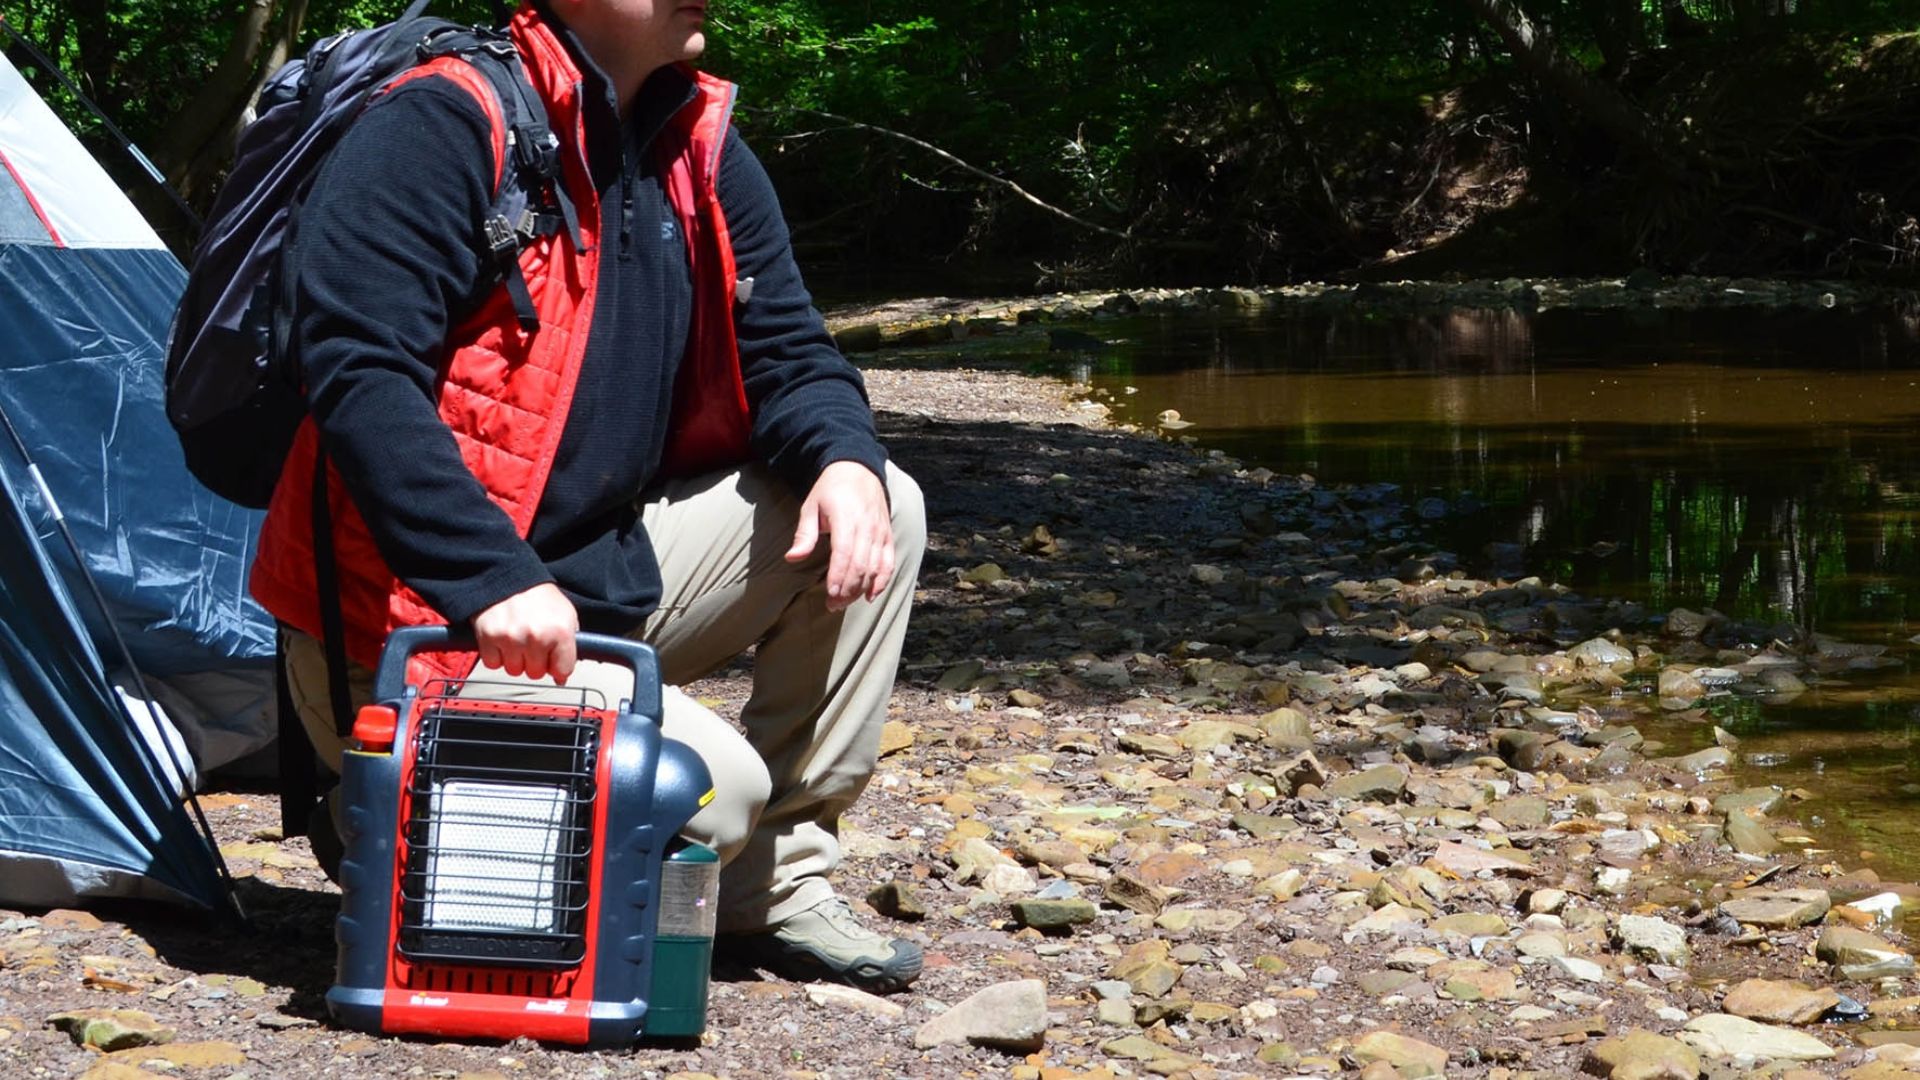 Portable Camping Heaters For Your Next Outdoors Adventure